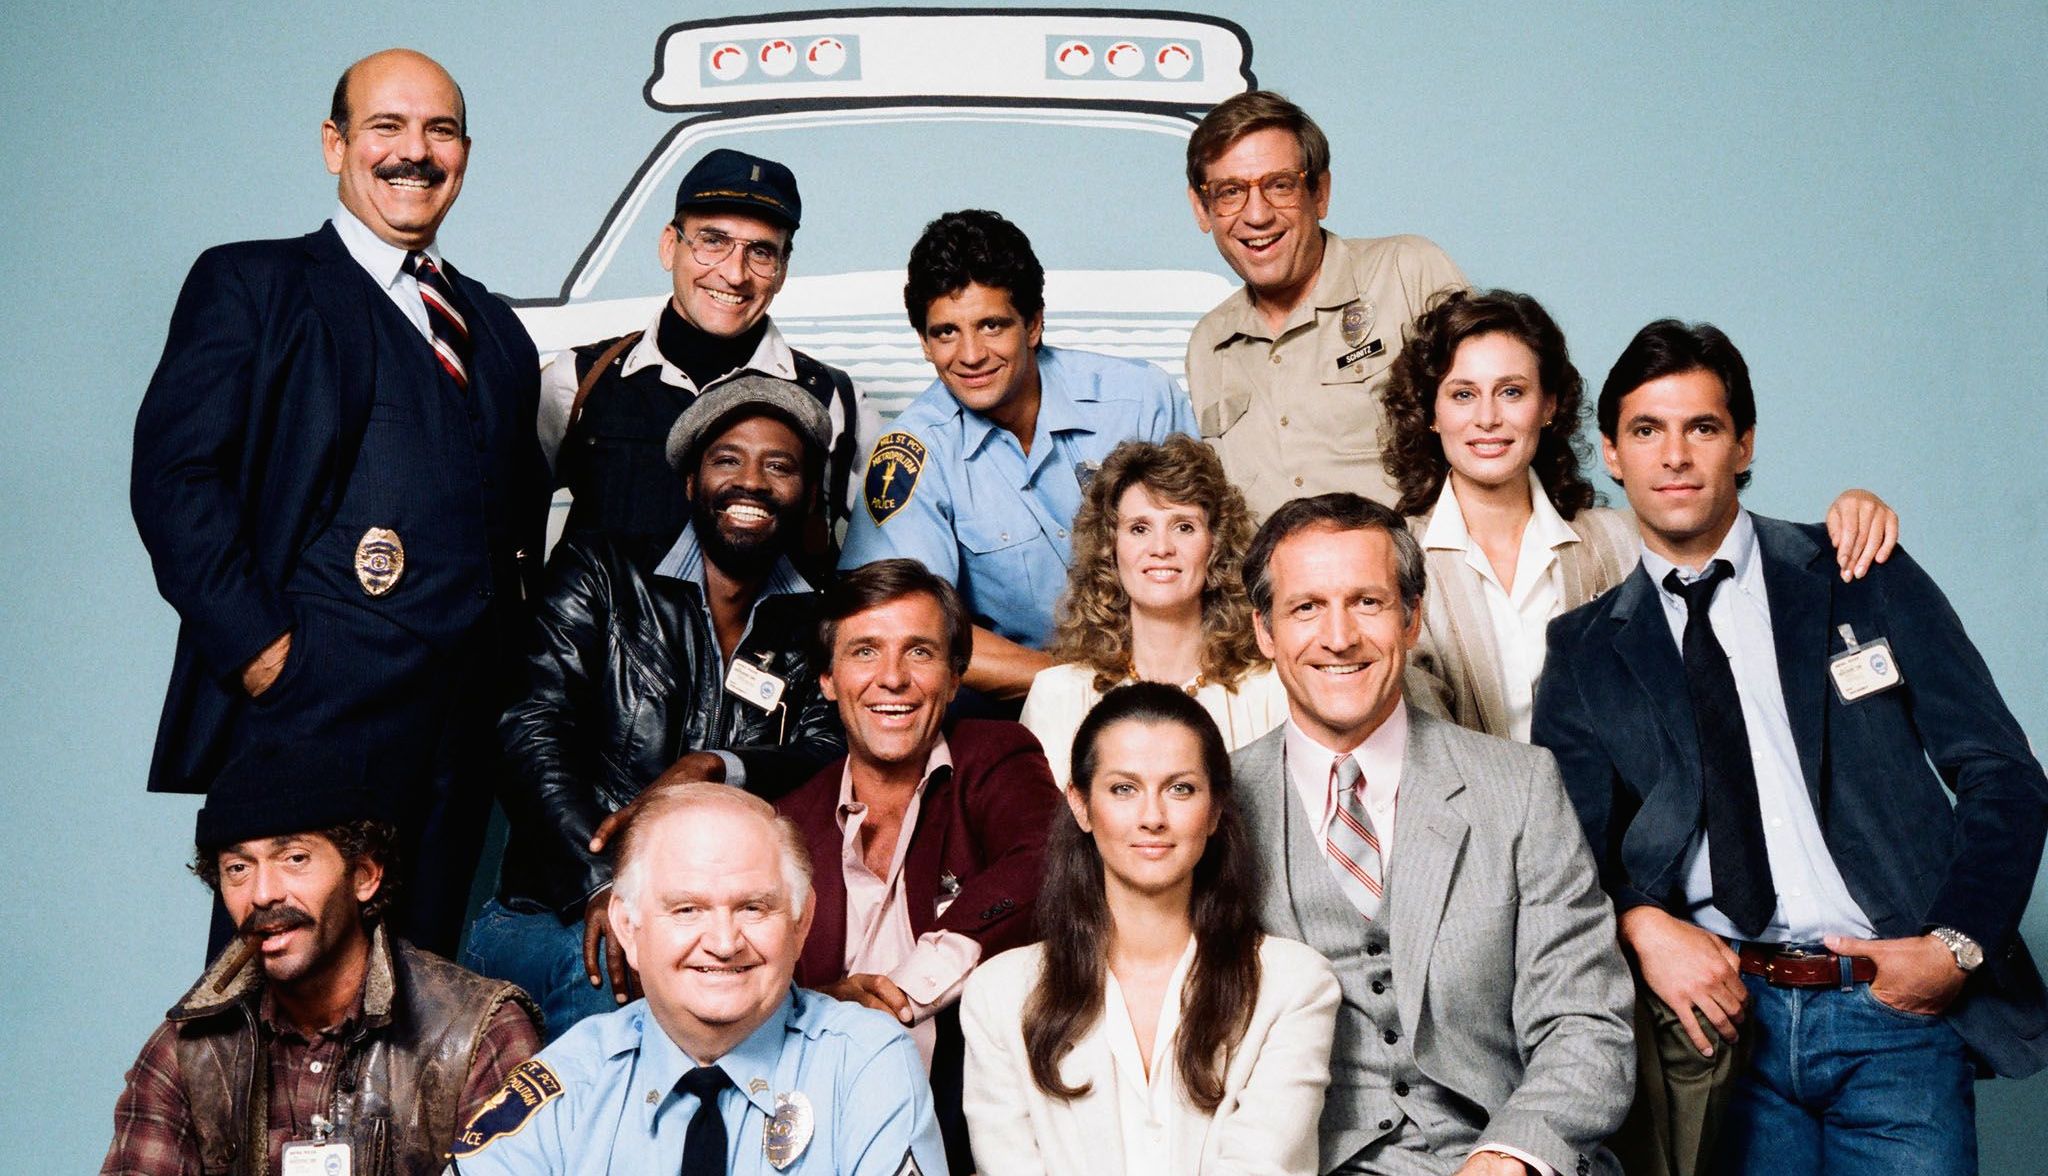 5 TV Shows From the 1980s that Changed Television Forever